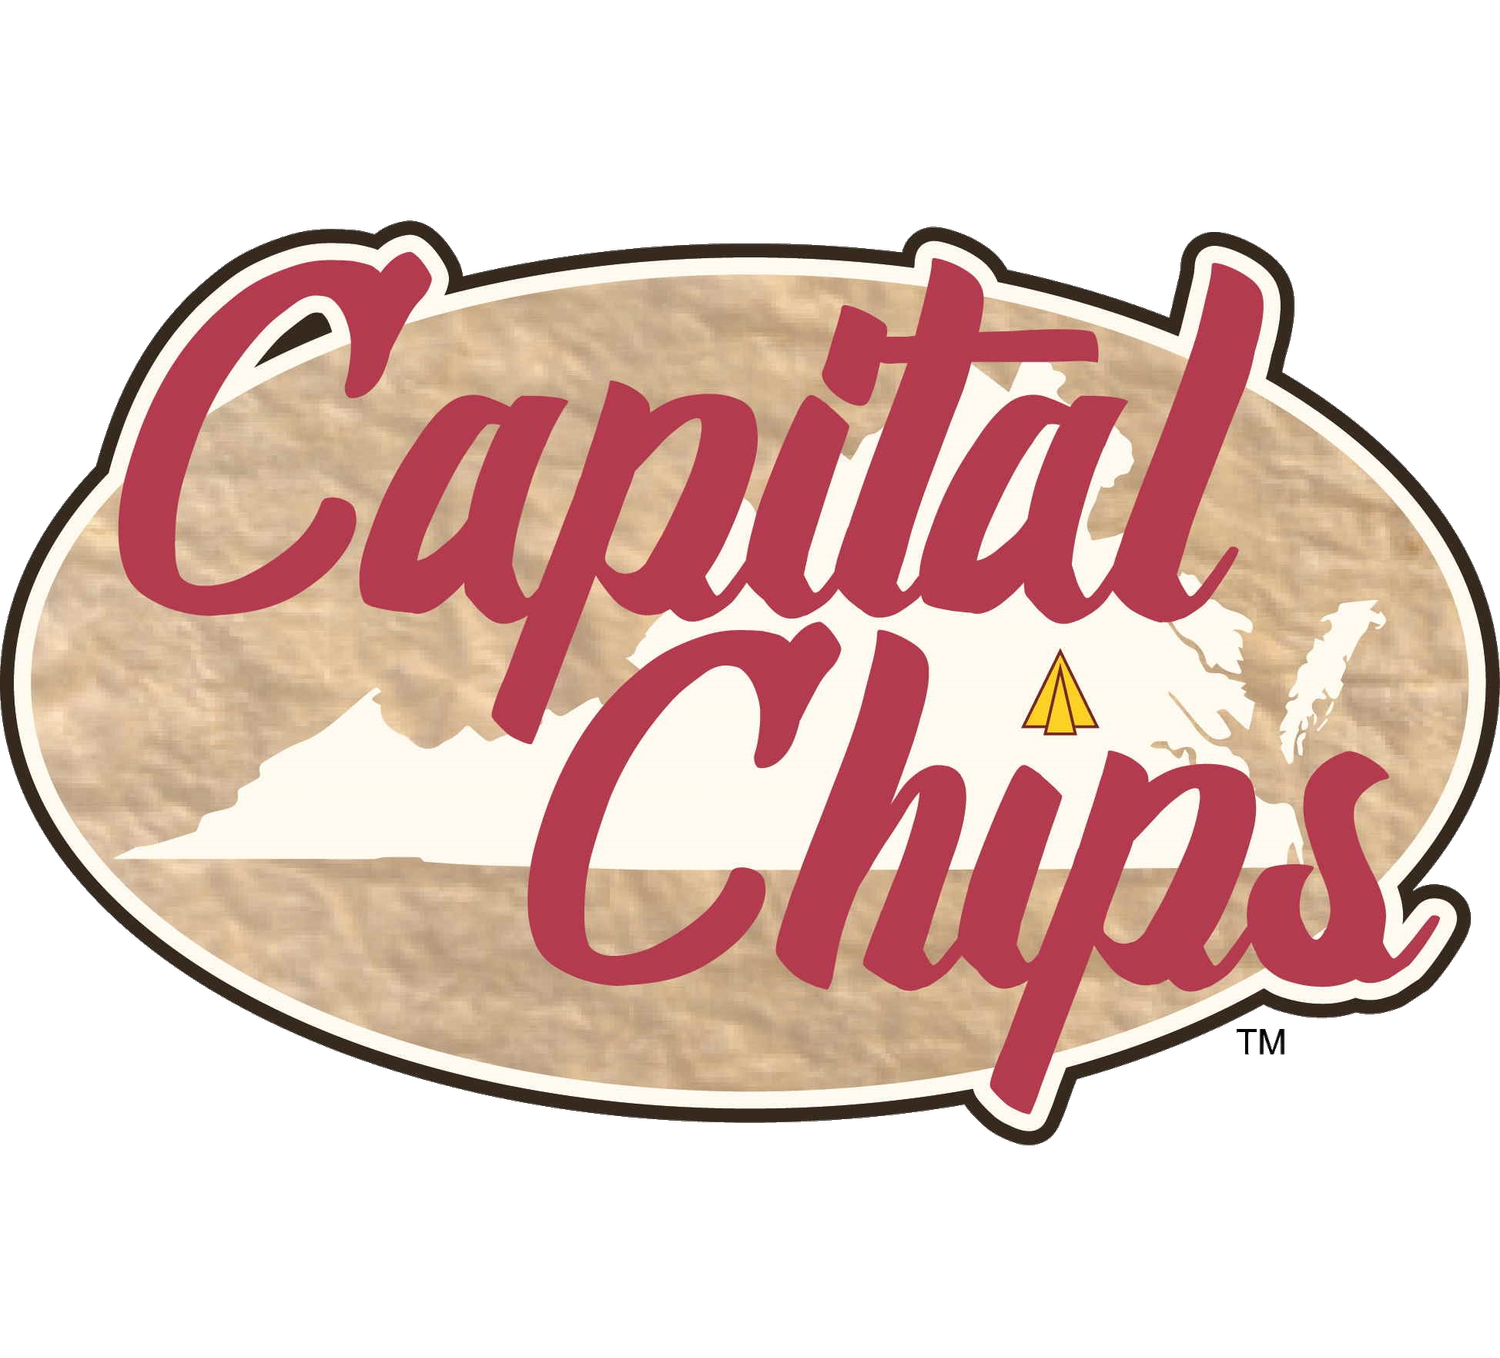 Capital Chips